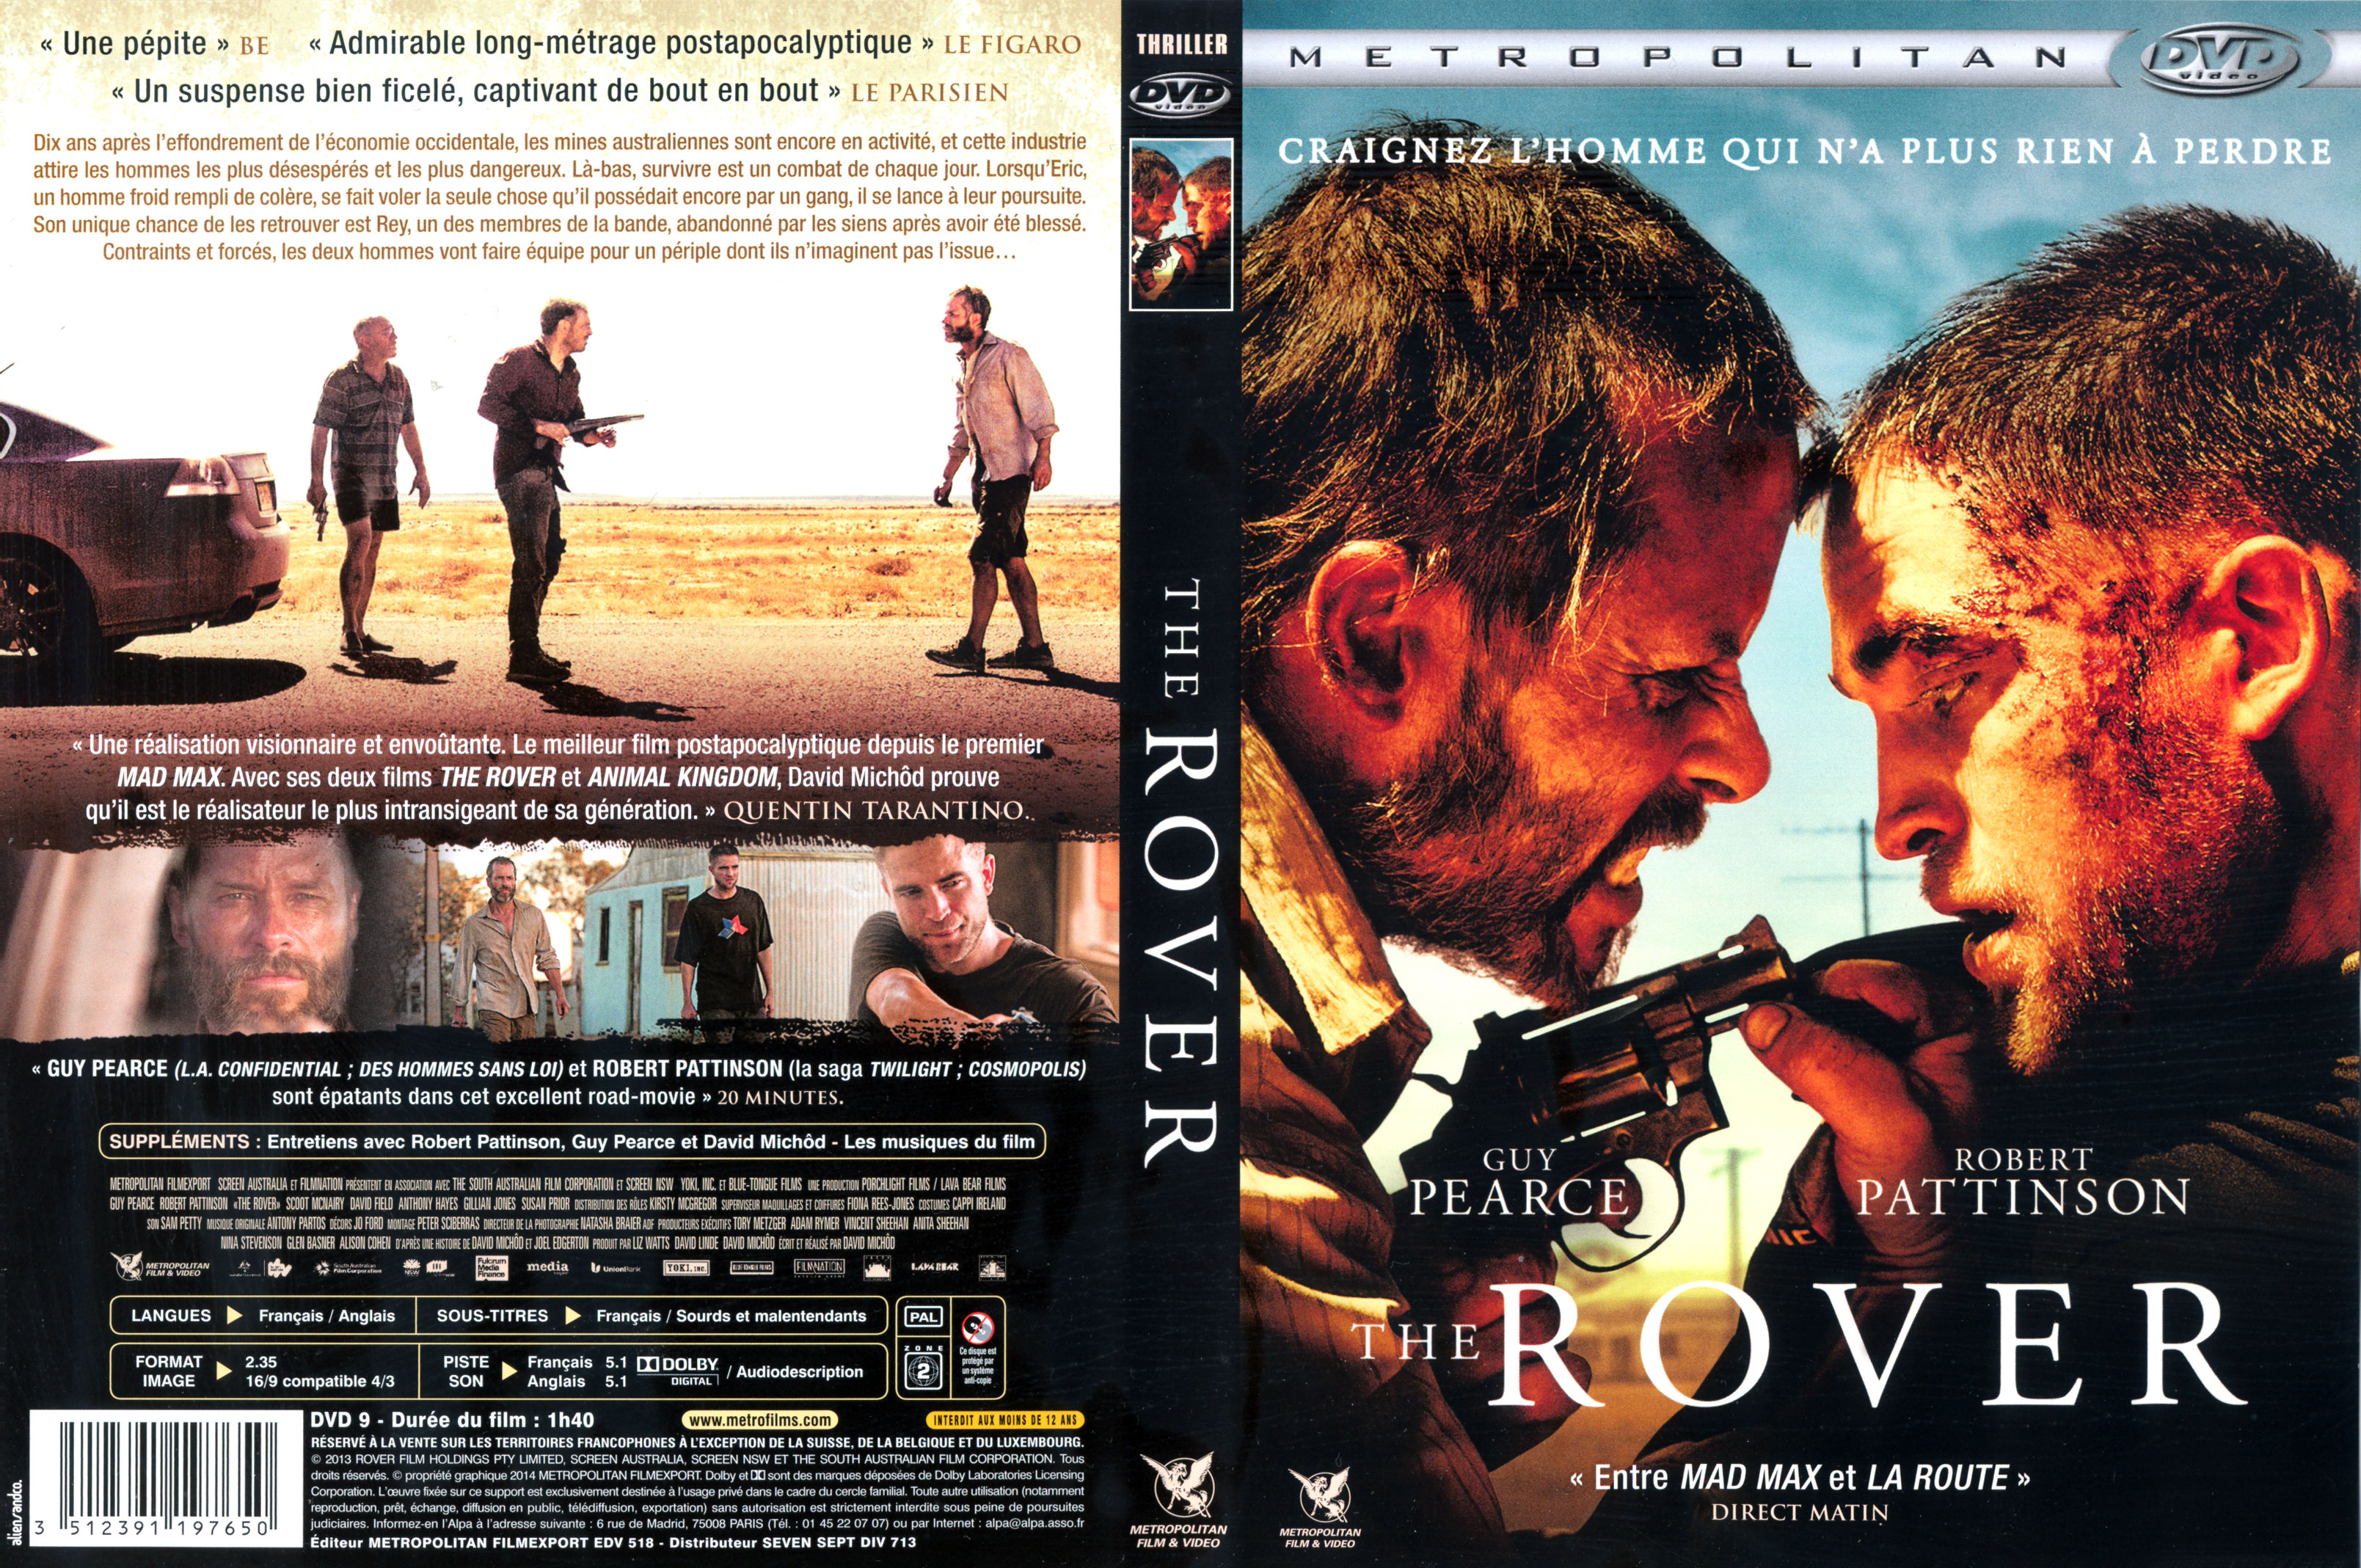 Jaquette DVD The Rover